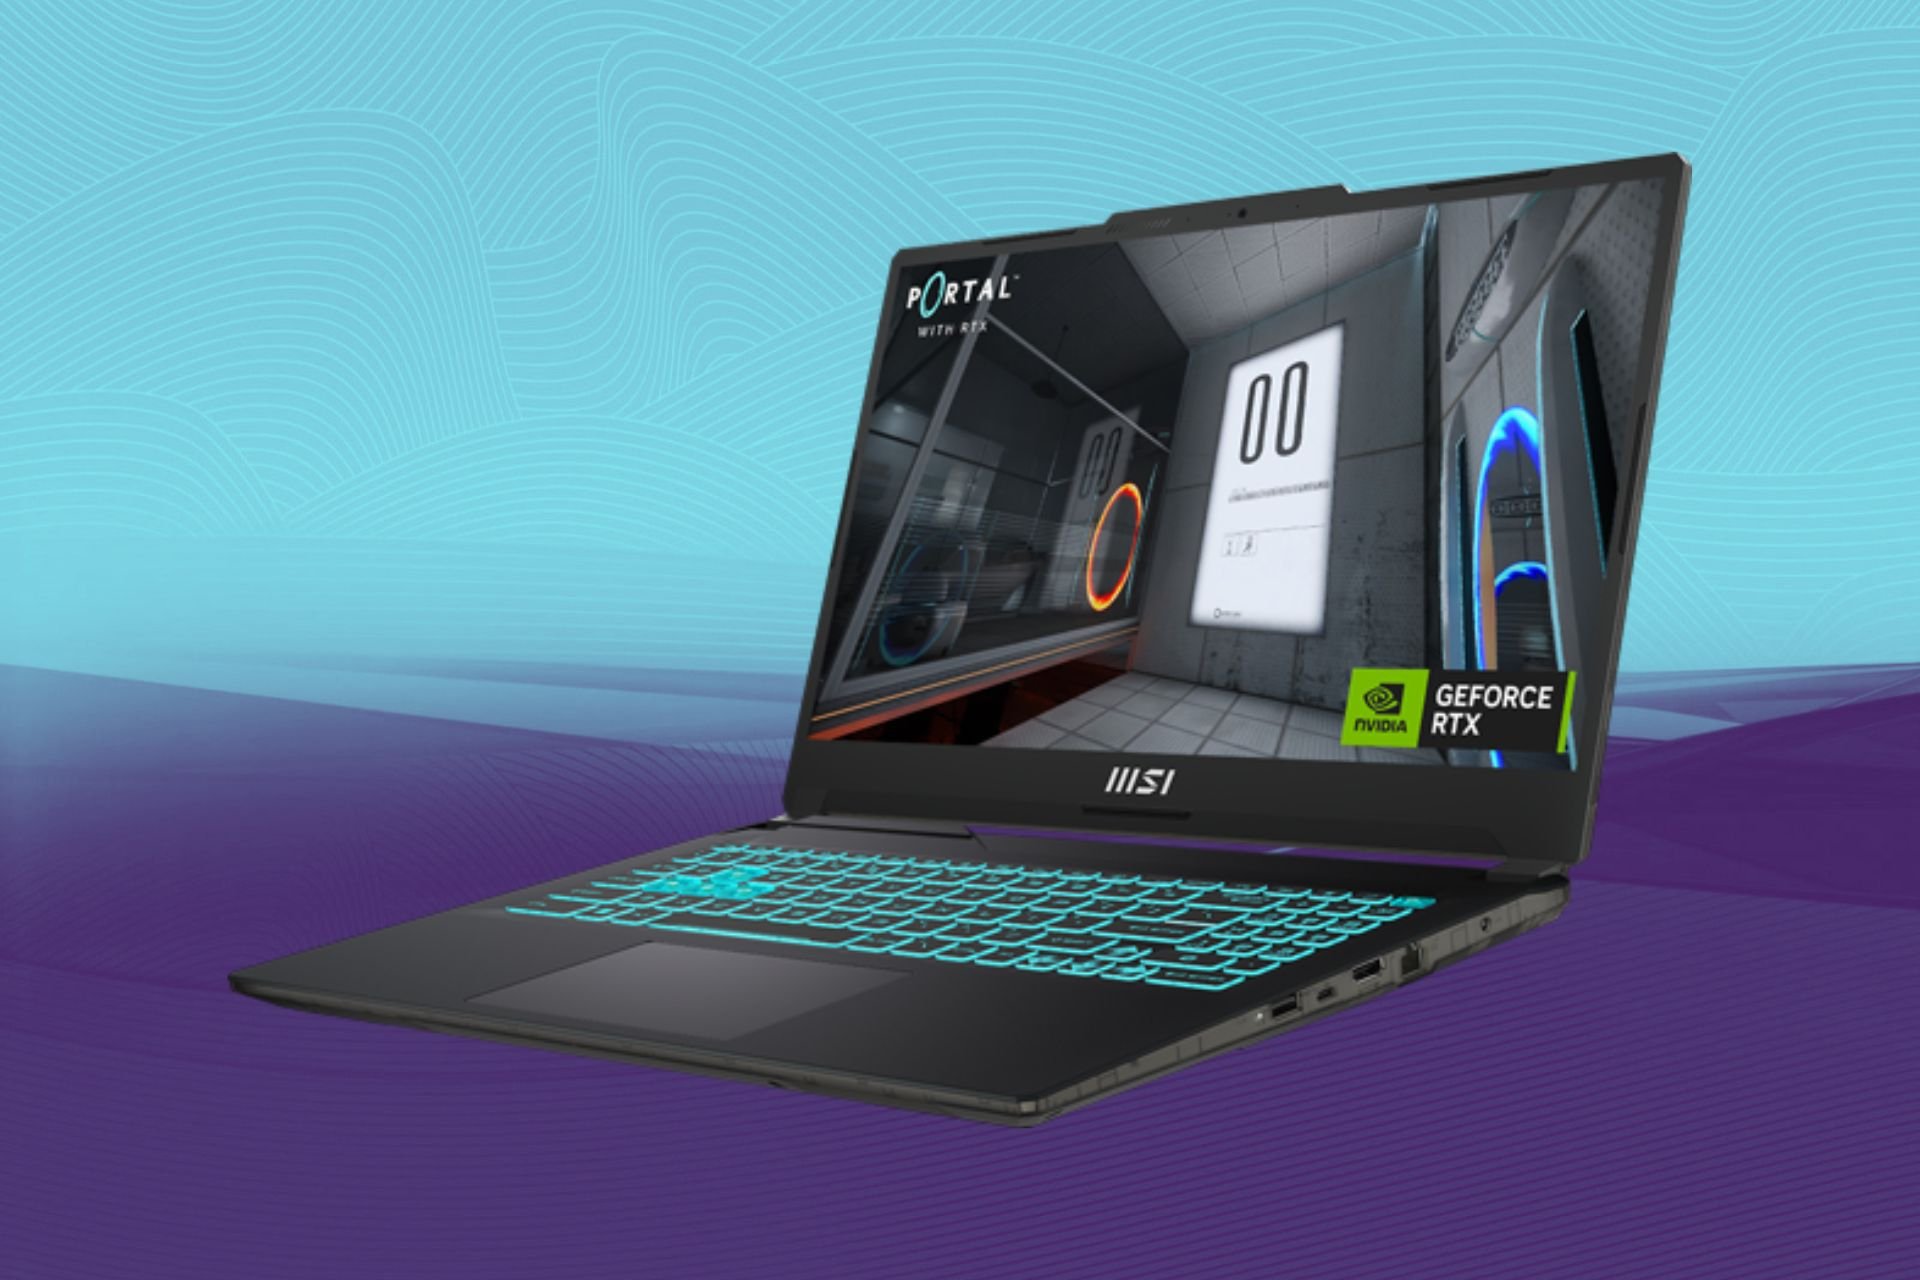 MSI Cyborg budget laptop featuring the game Portal